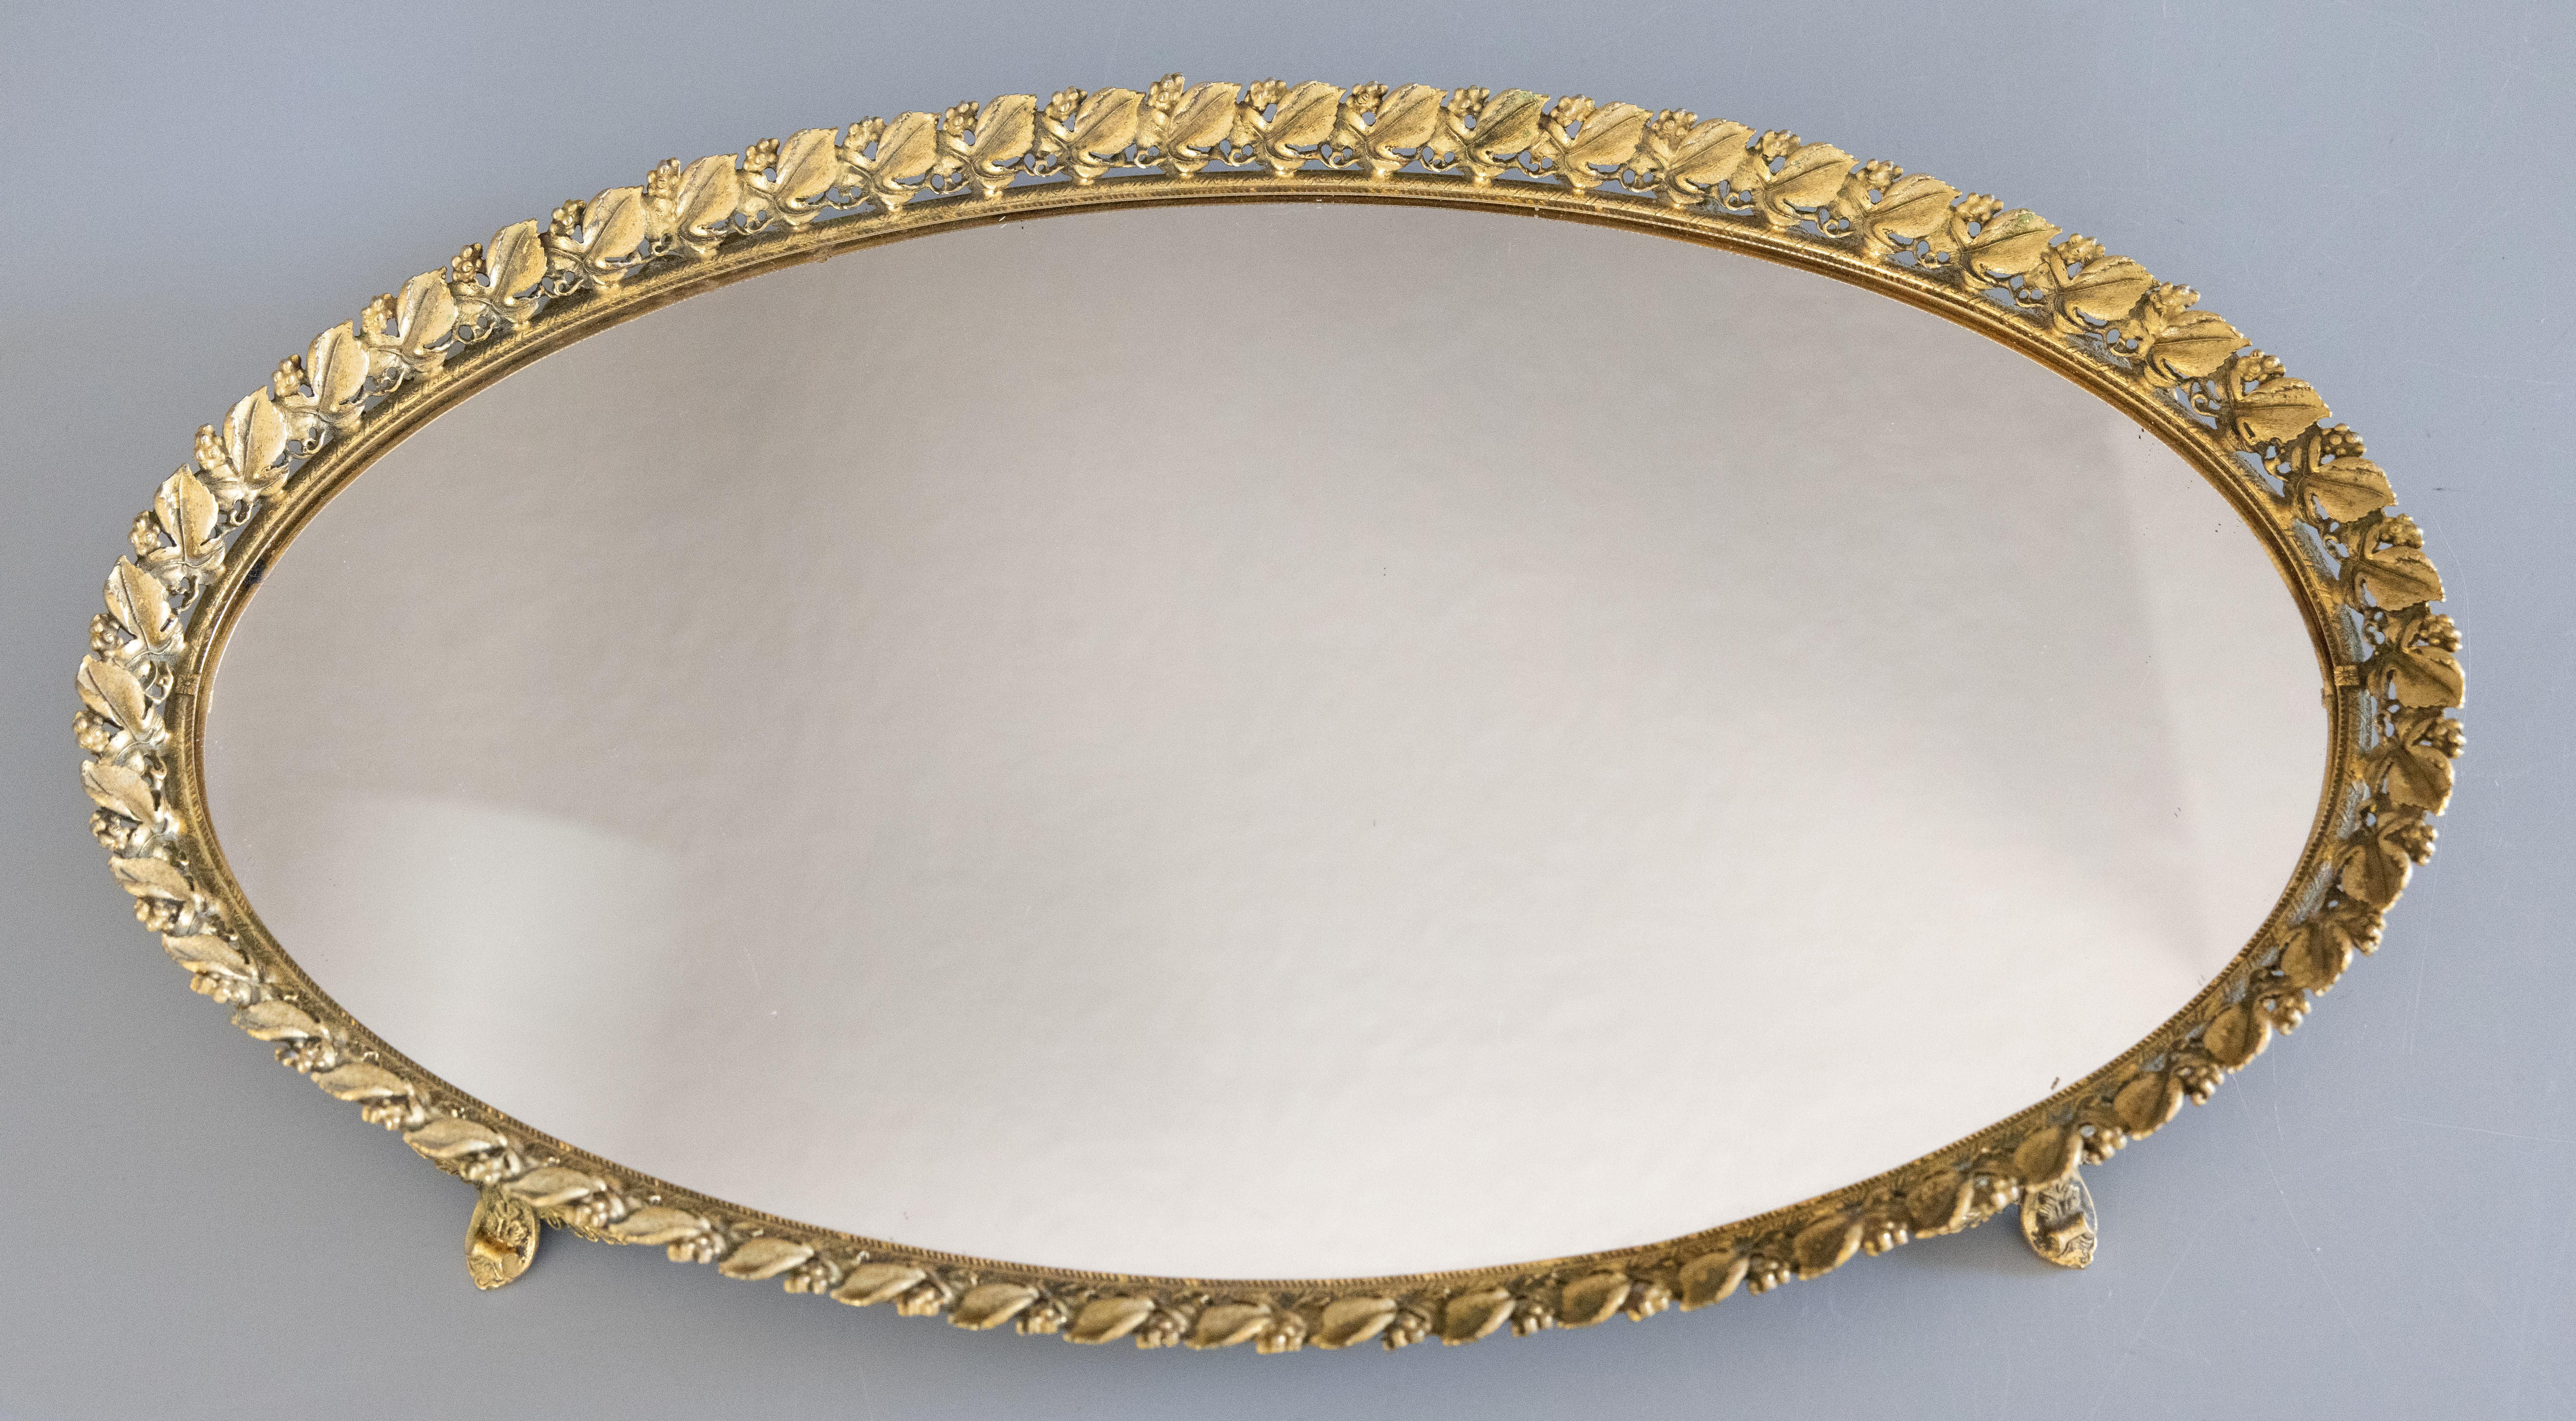 A stunning vintage French gilt ormolu oval mirror vanity or bar tray, circa 1950. This beautiful tray is a nice large oval size surrounded by a gorgeous grape leaf gallery with ornate feet in a lovely gilt patina. It would be perfect for displaying